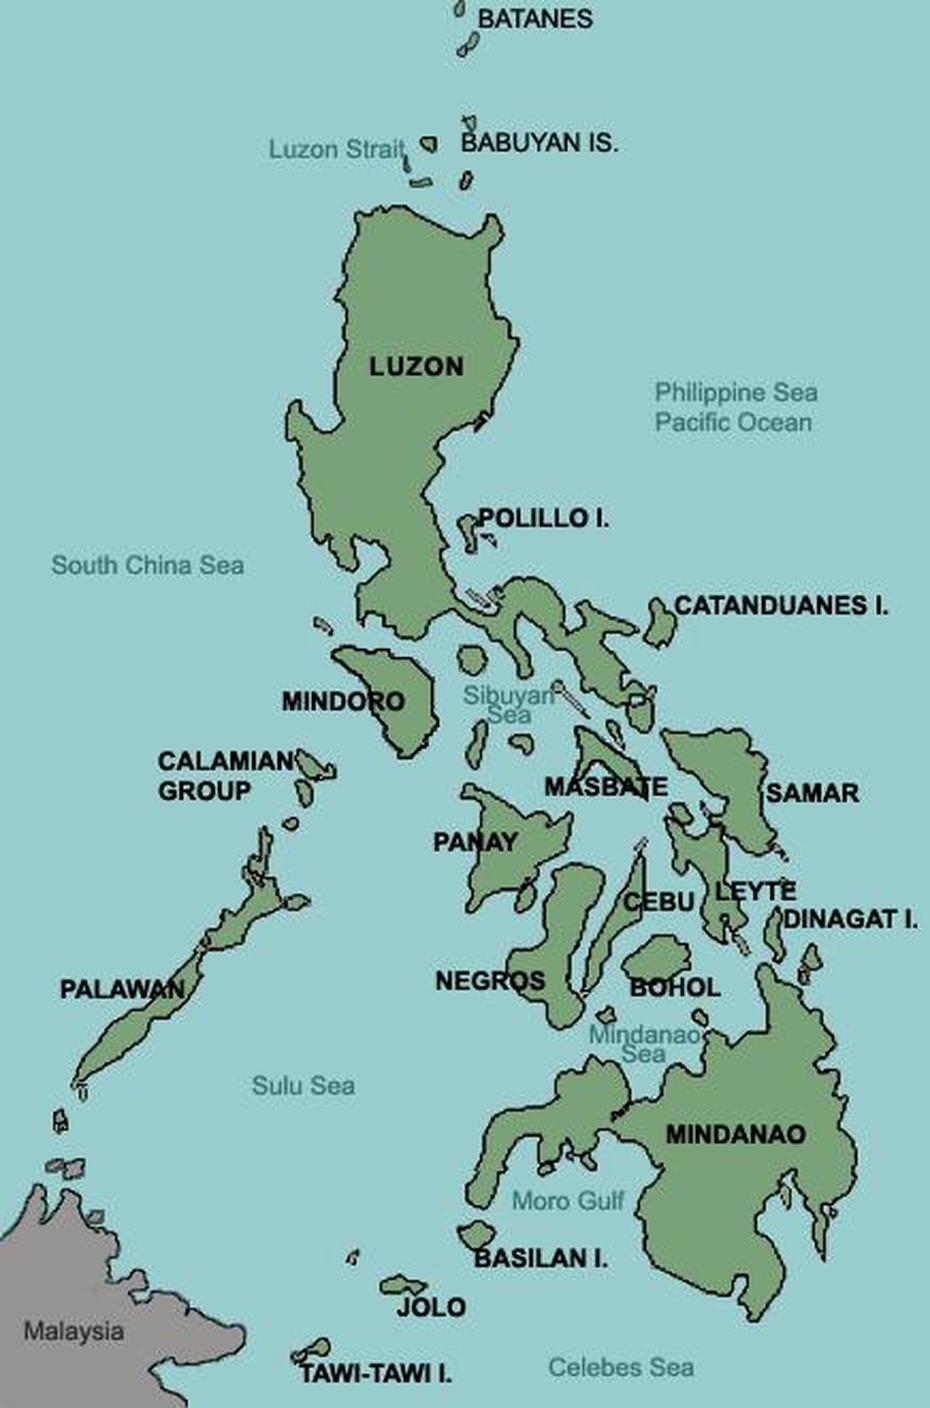 Map Of The Philippines – 88 World Maps, Dimataling, Philippines, Philippines Powerpoint Template, Philippines Road